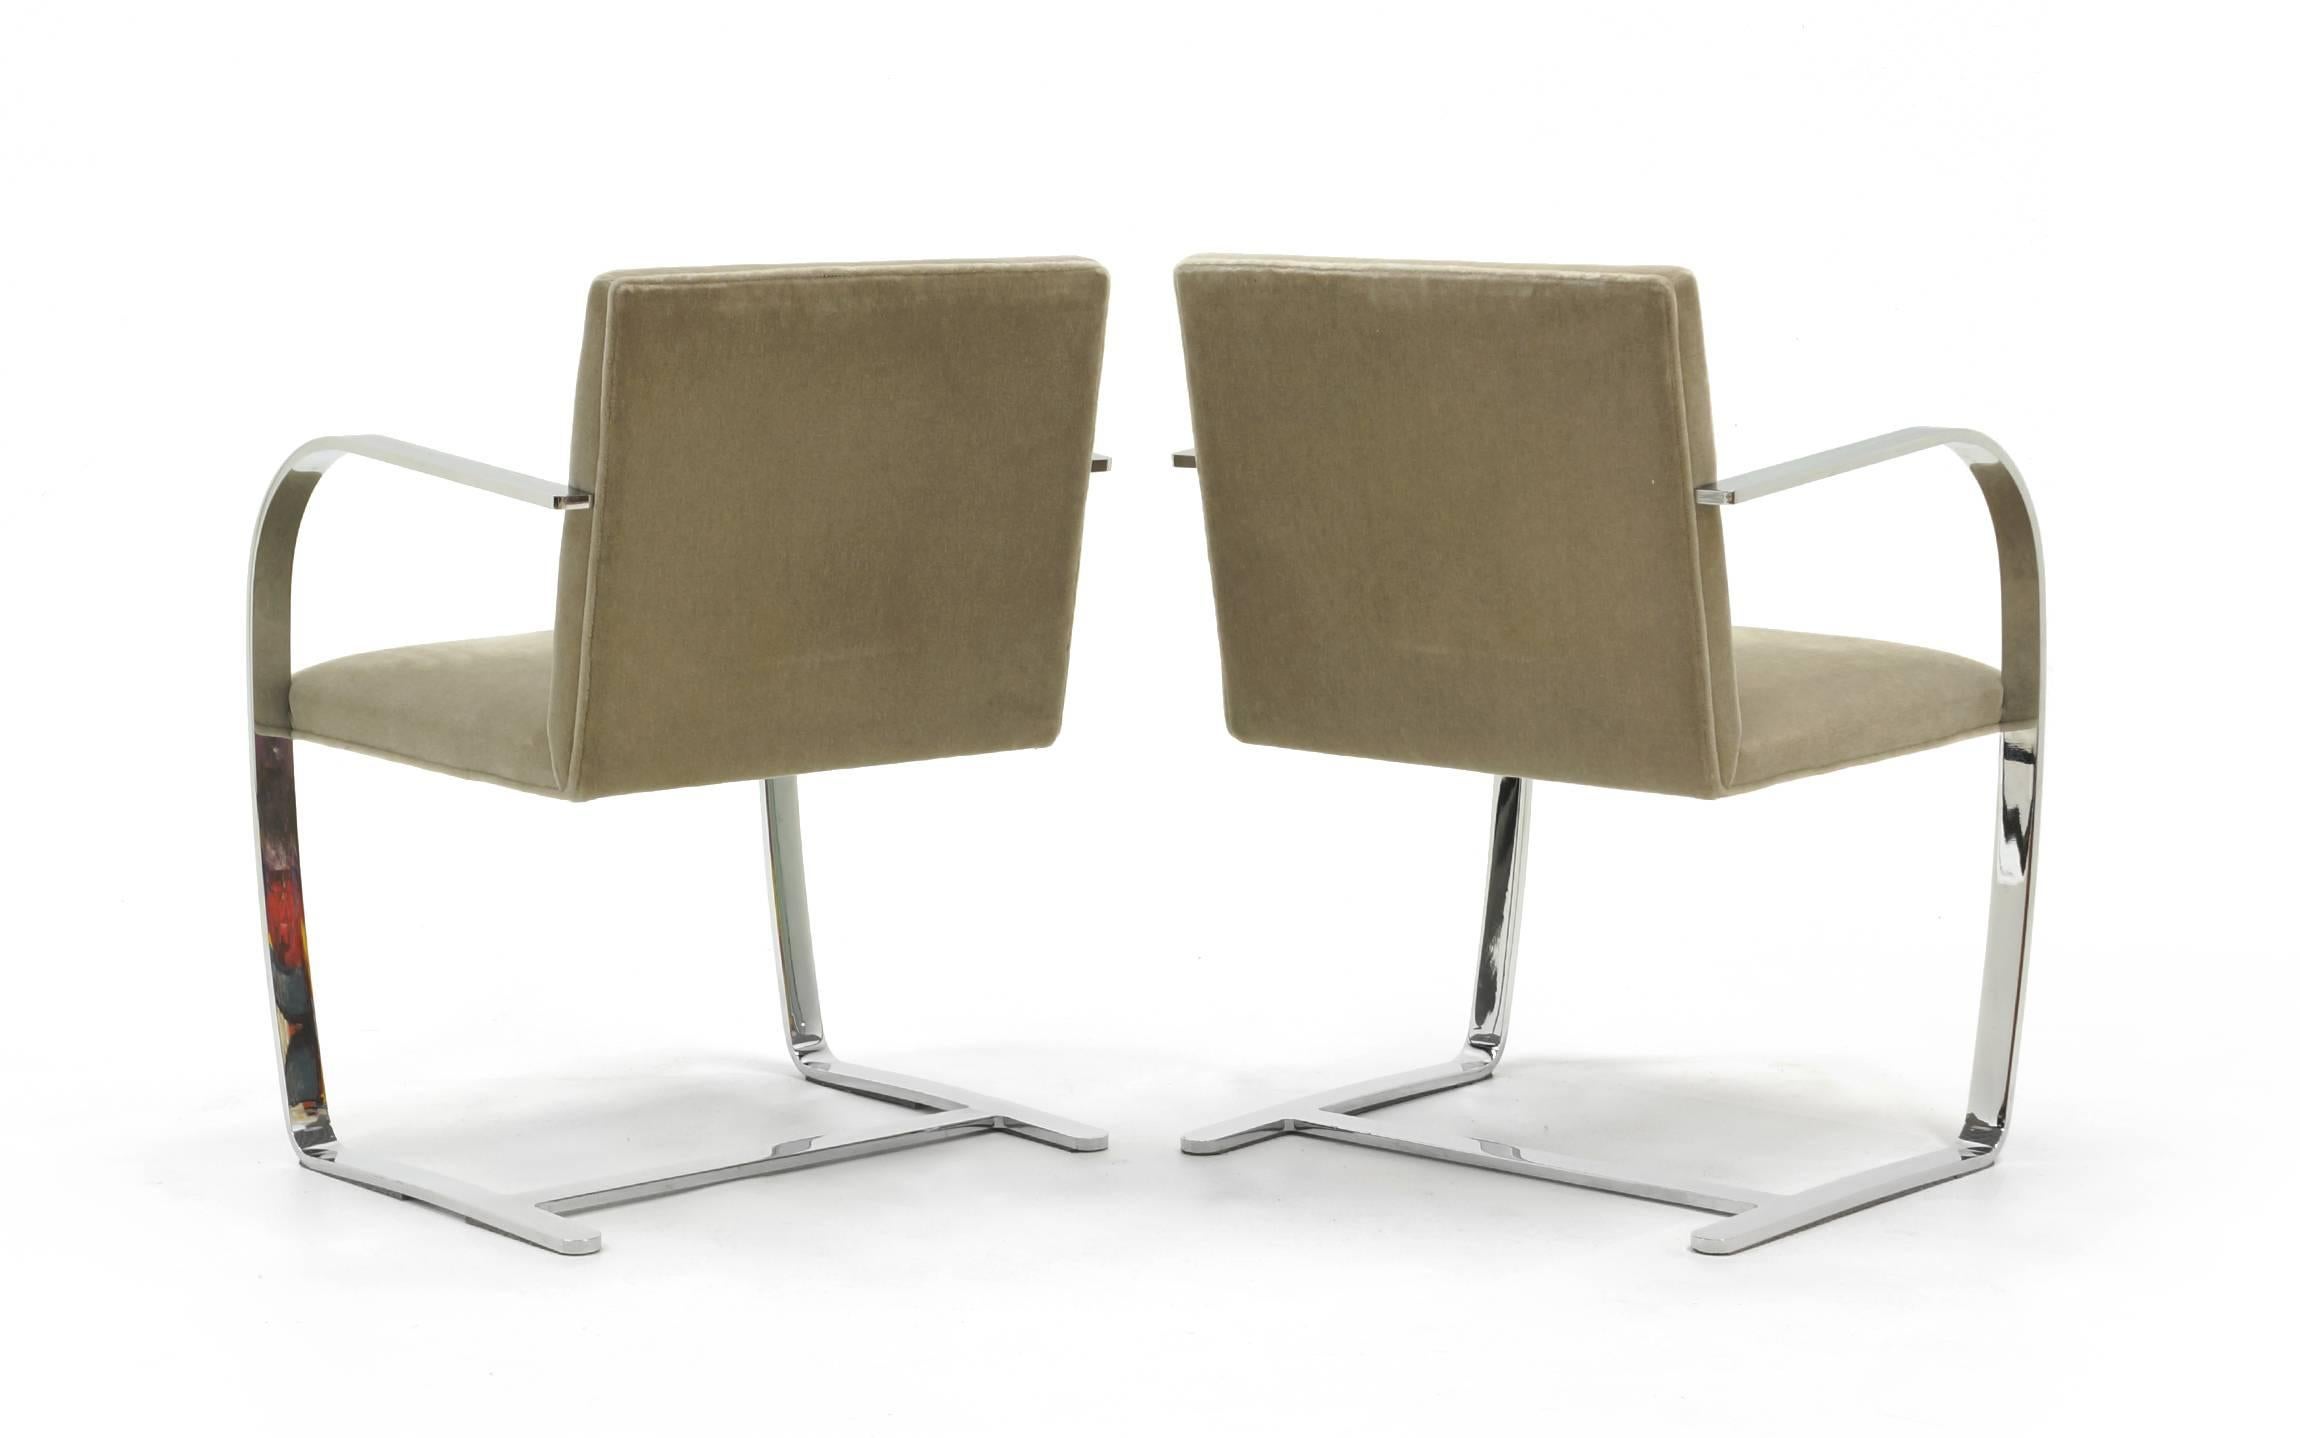 Mid-20th Century Pair of Ludwig Mies van der Rohe Flat Bar Brno Chairs for Knoll